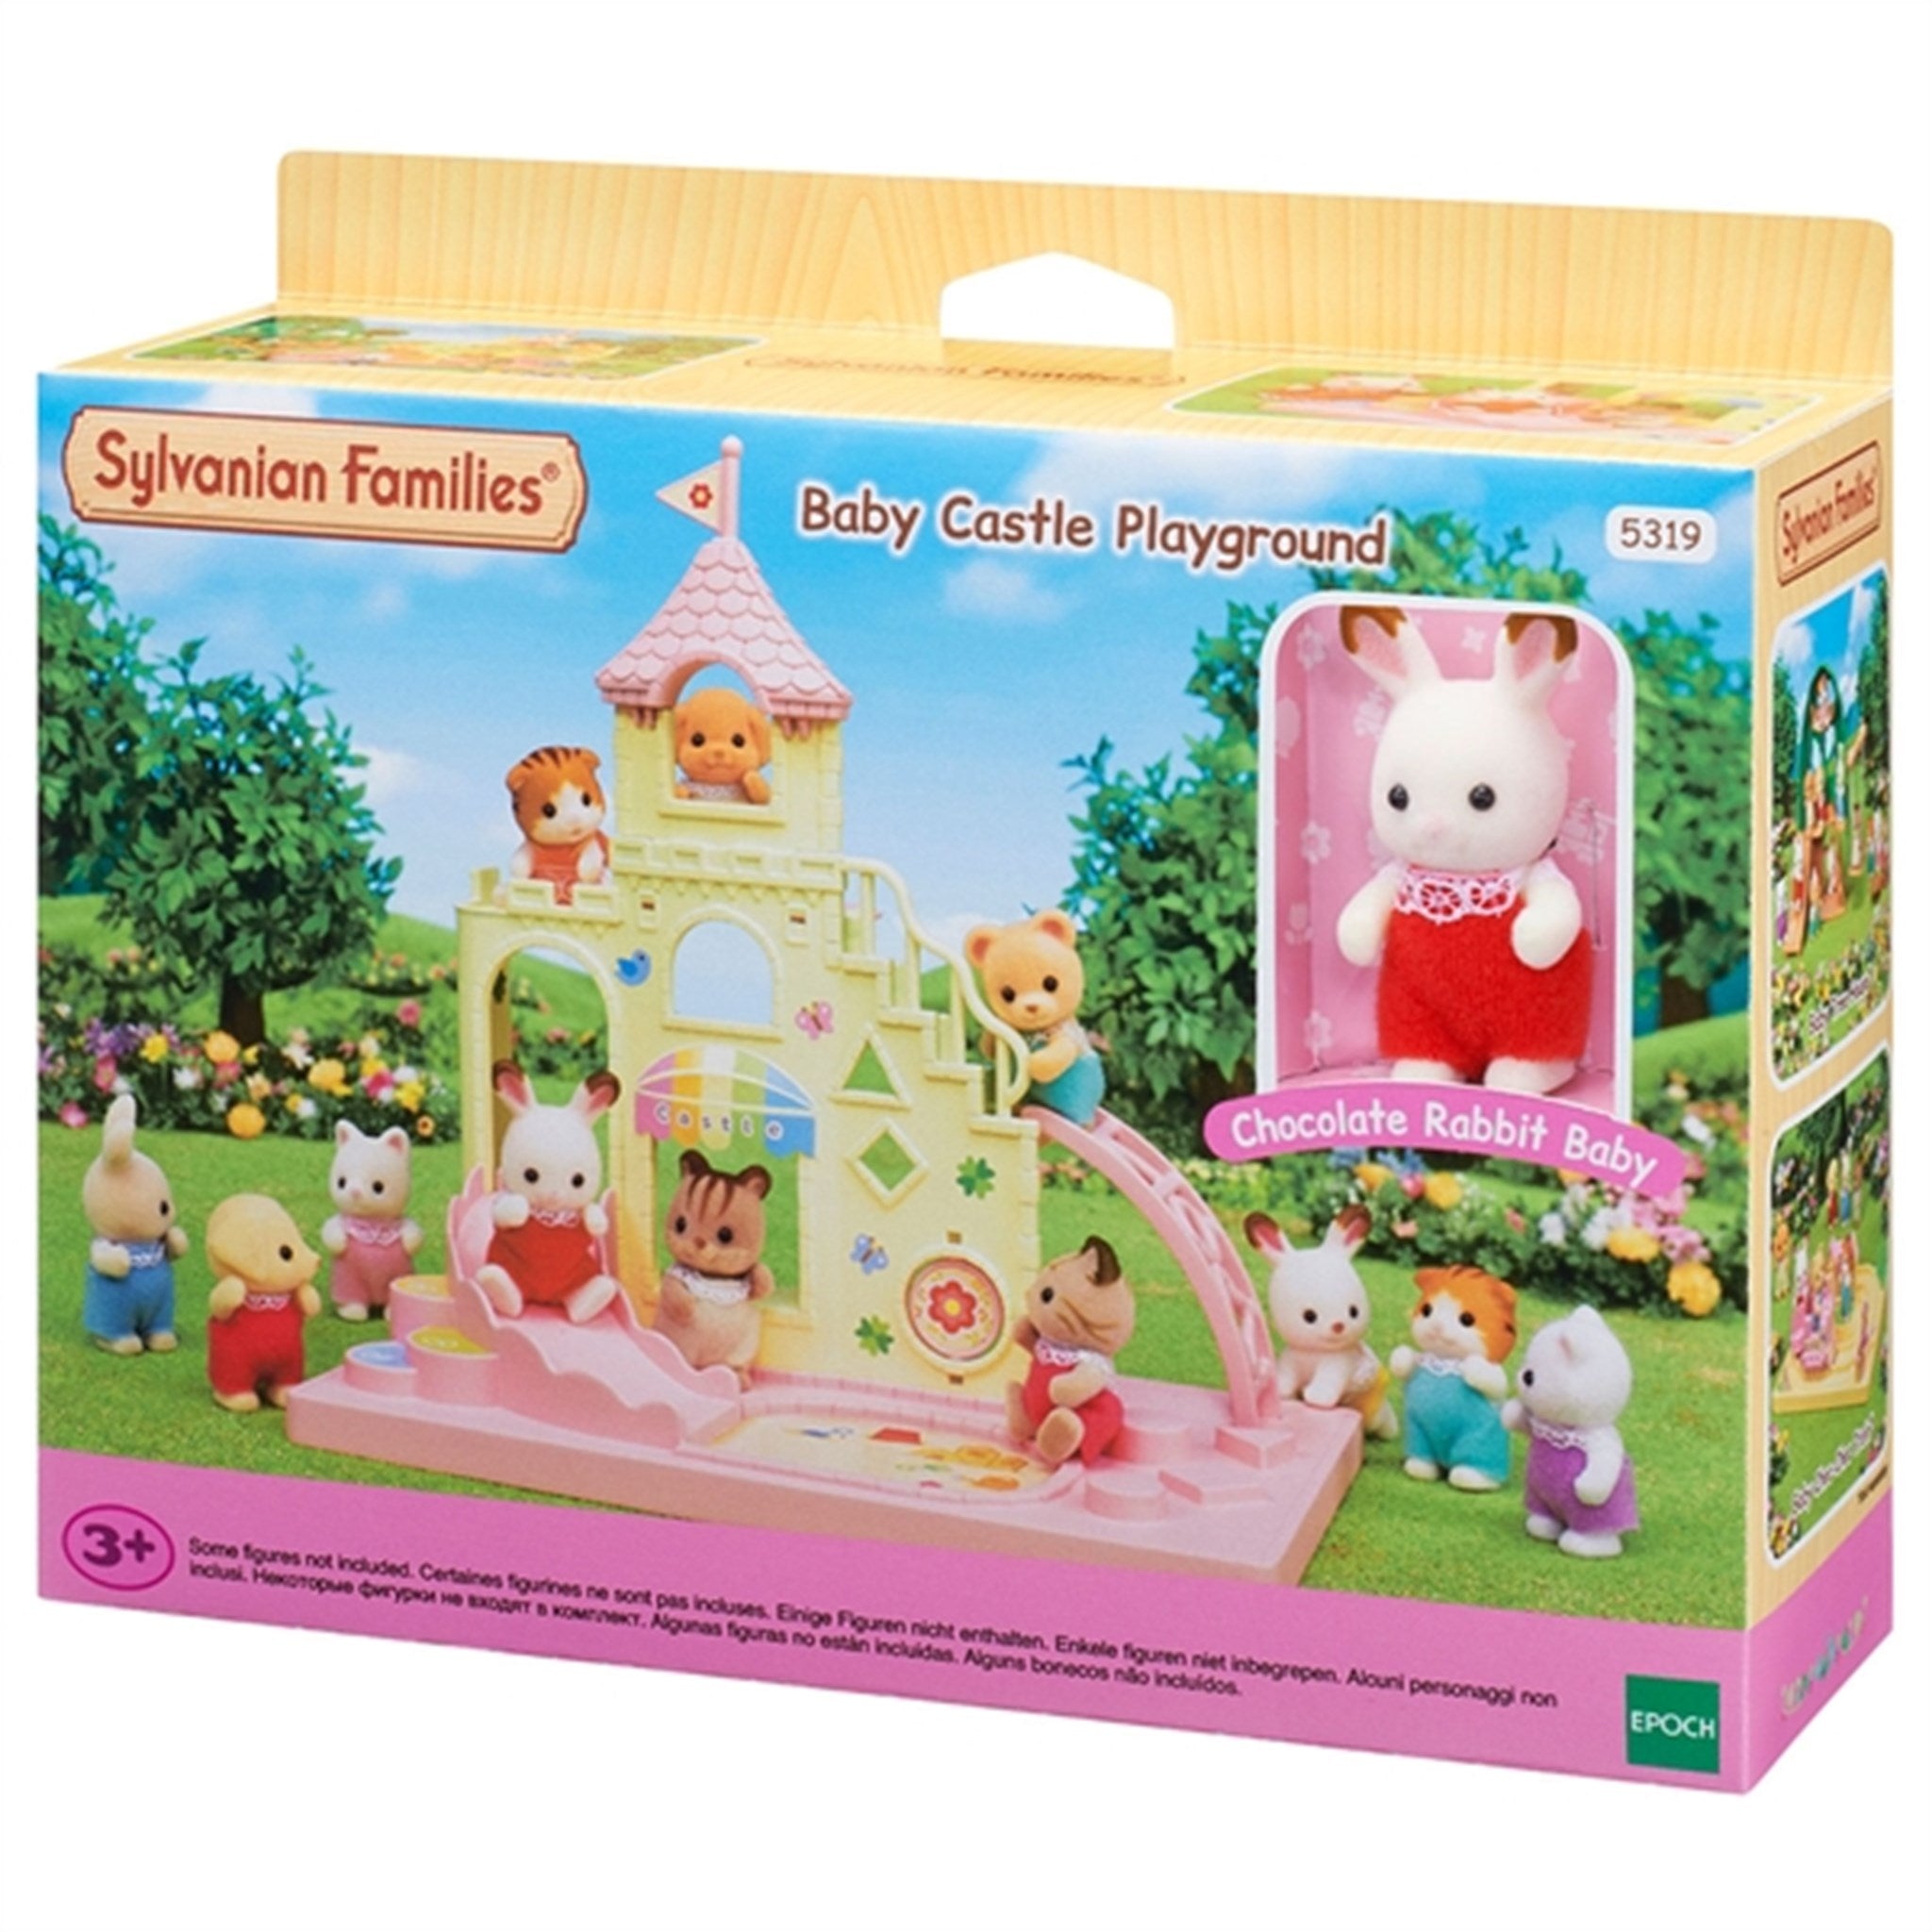 Sylvanian Families® Baby Castle Playground